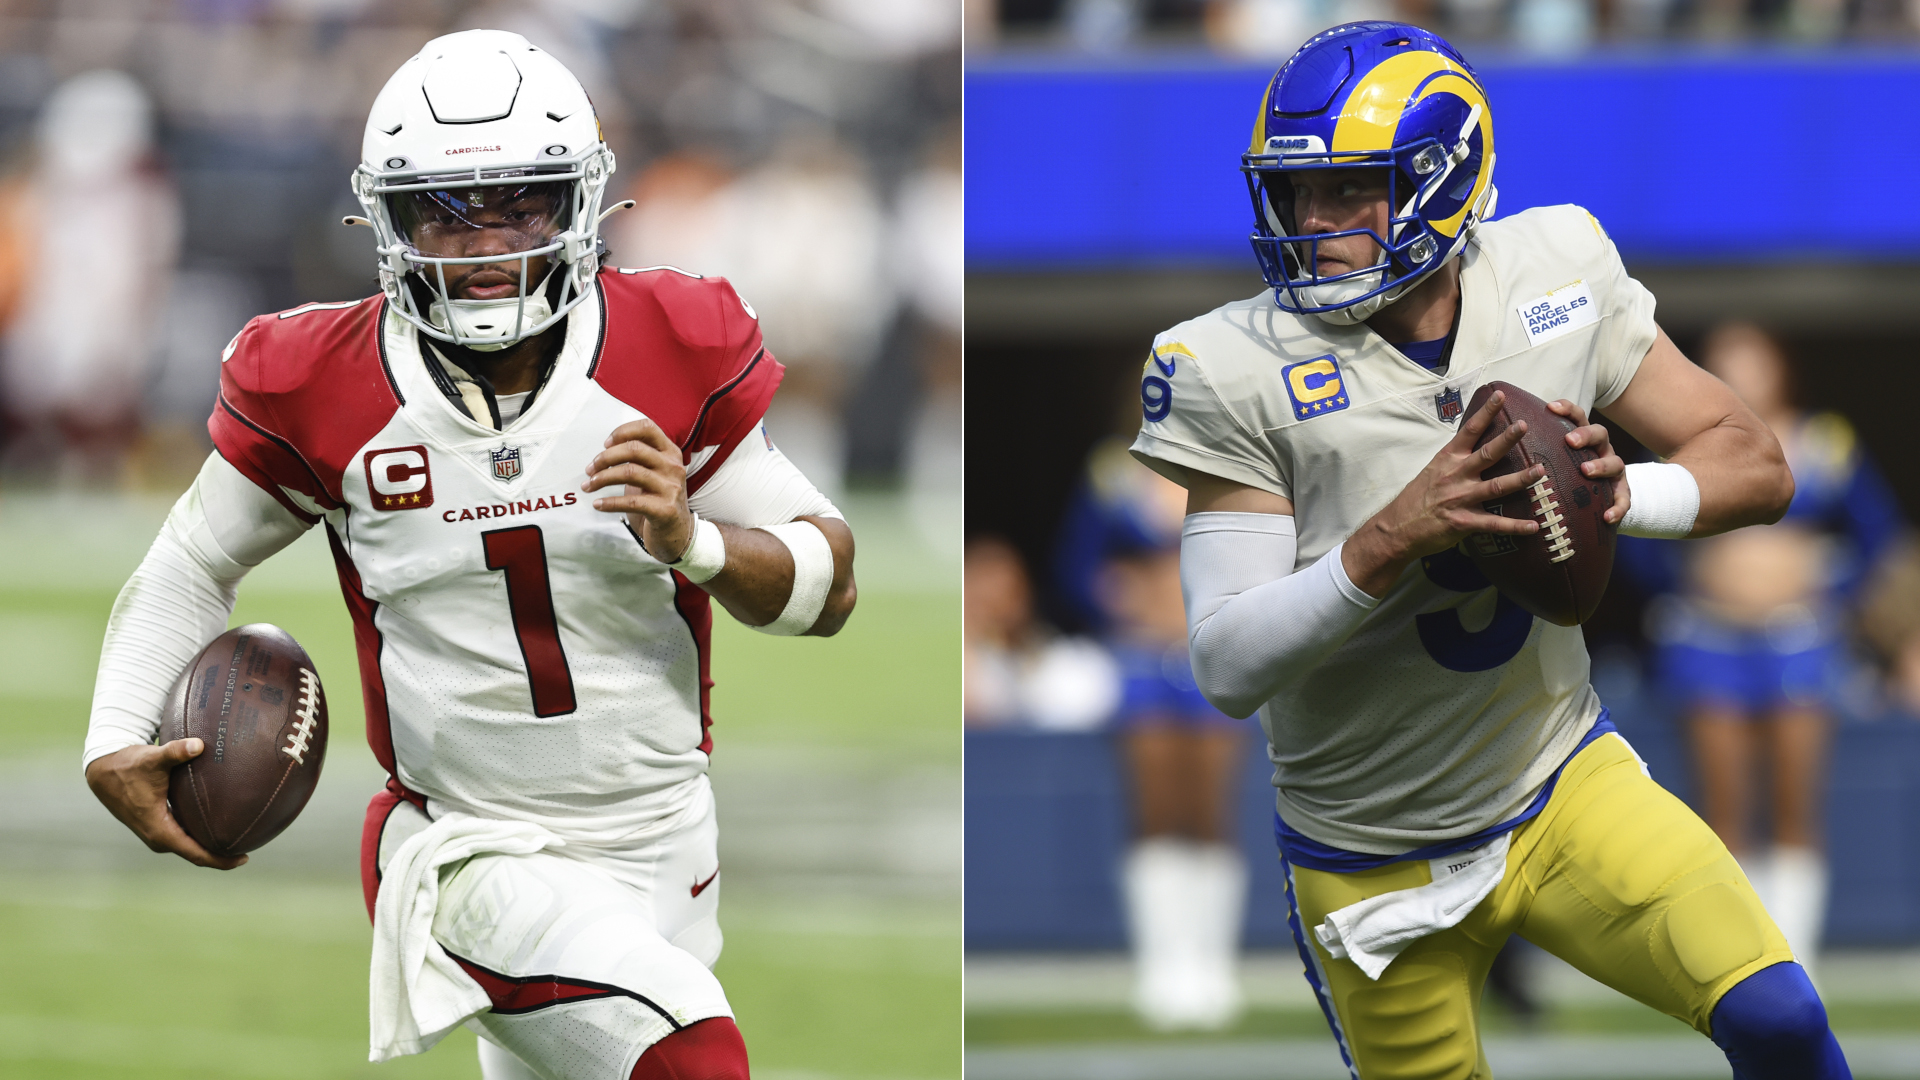 Rams vs Cardinals live stream: how to watch NFL week 3 online and TV from anywhere today | TechRadar